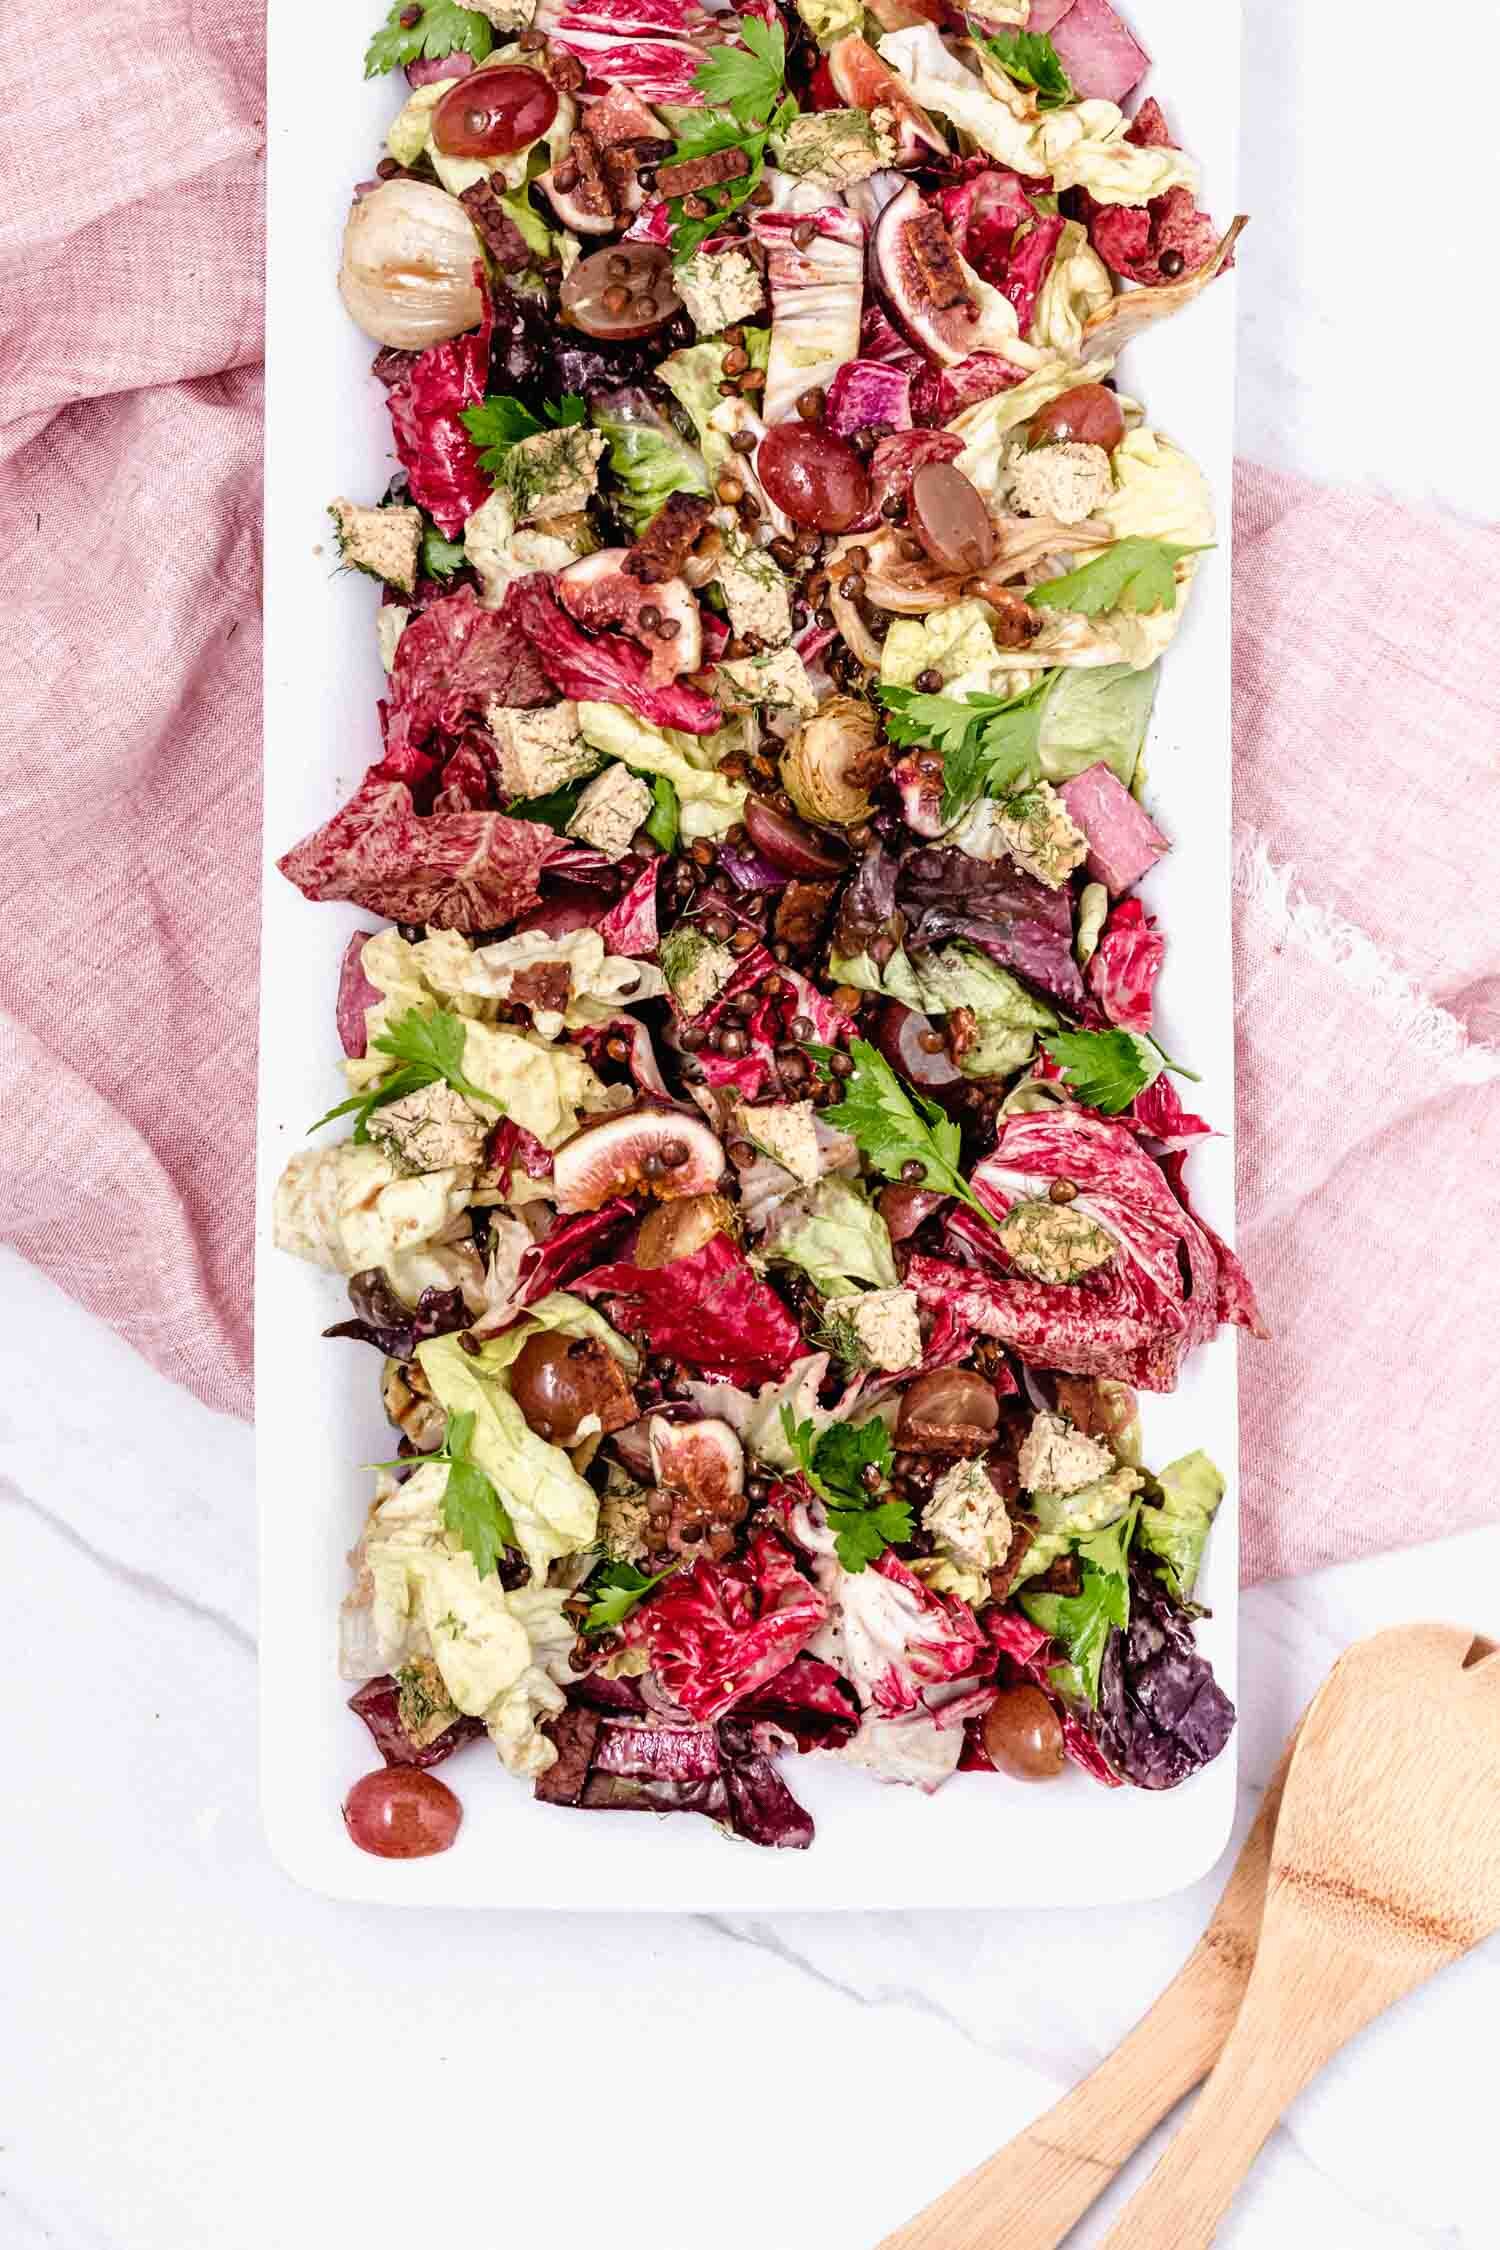 Radicchio Harvest Salad with Pecan Dressing (Vegan, GF) is a full holiday meal in itself, yet makes a crowd-pleasing plant-based addition to a holiday spread. #veganholiday #plantbasedrecipe #thanksgiving #christmas #holidaysalad #radicchio #vegancheese #lentils #wildrice #veganbacon #figrecipe #pecan #vegansalad #harvestsalad #thanksgivingsalad #colorfulsalad #glutenfreeholiday